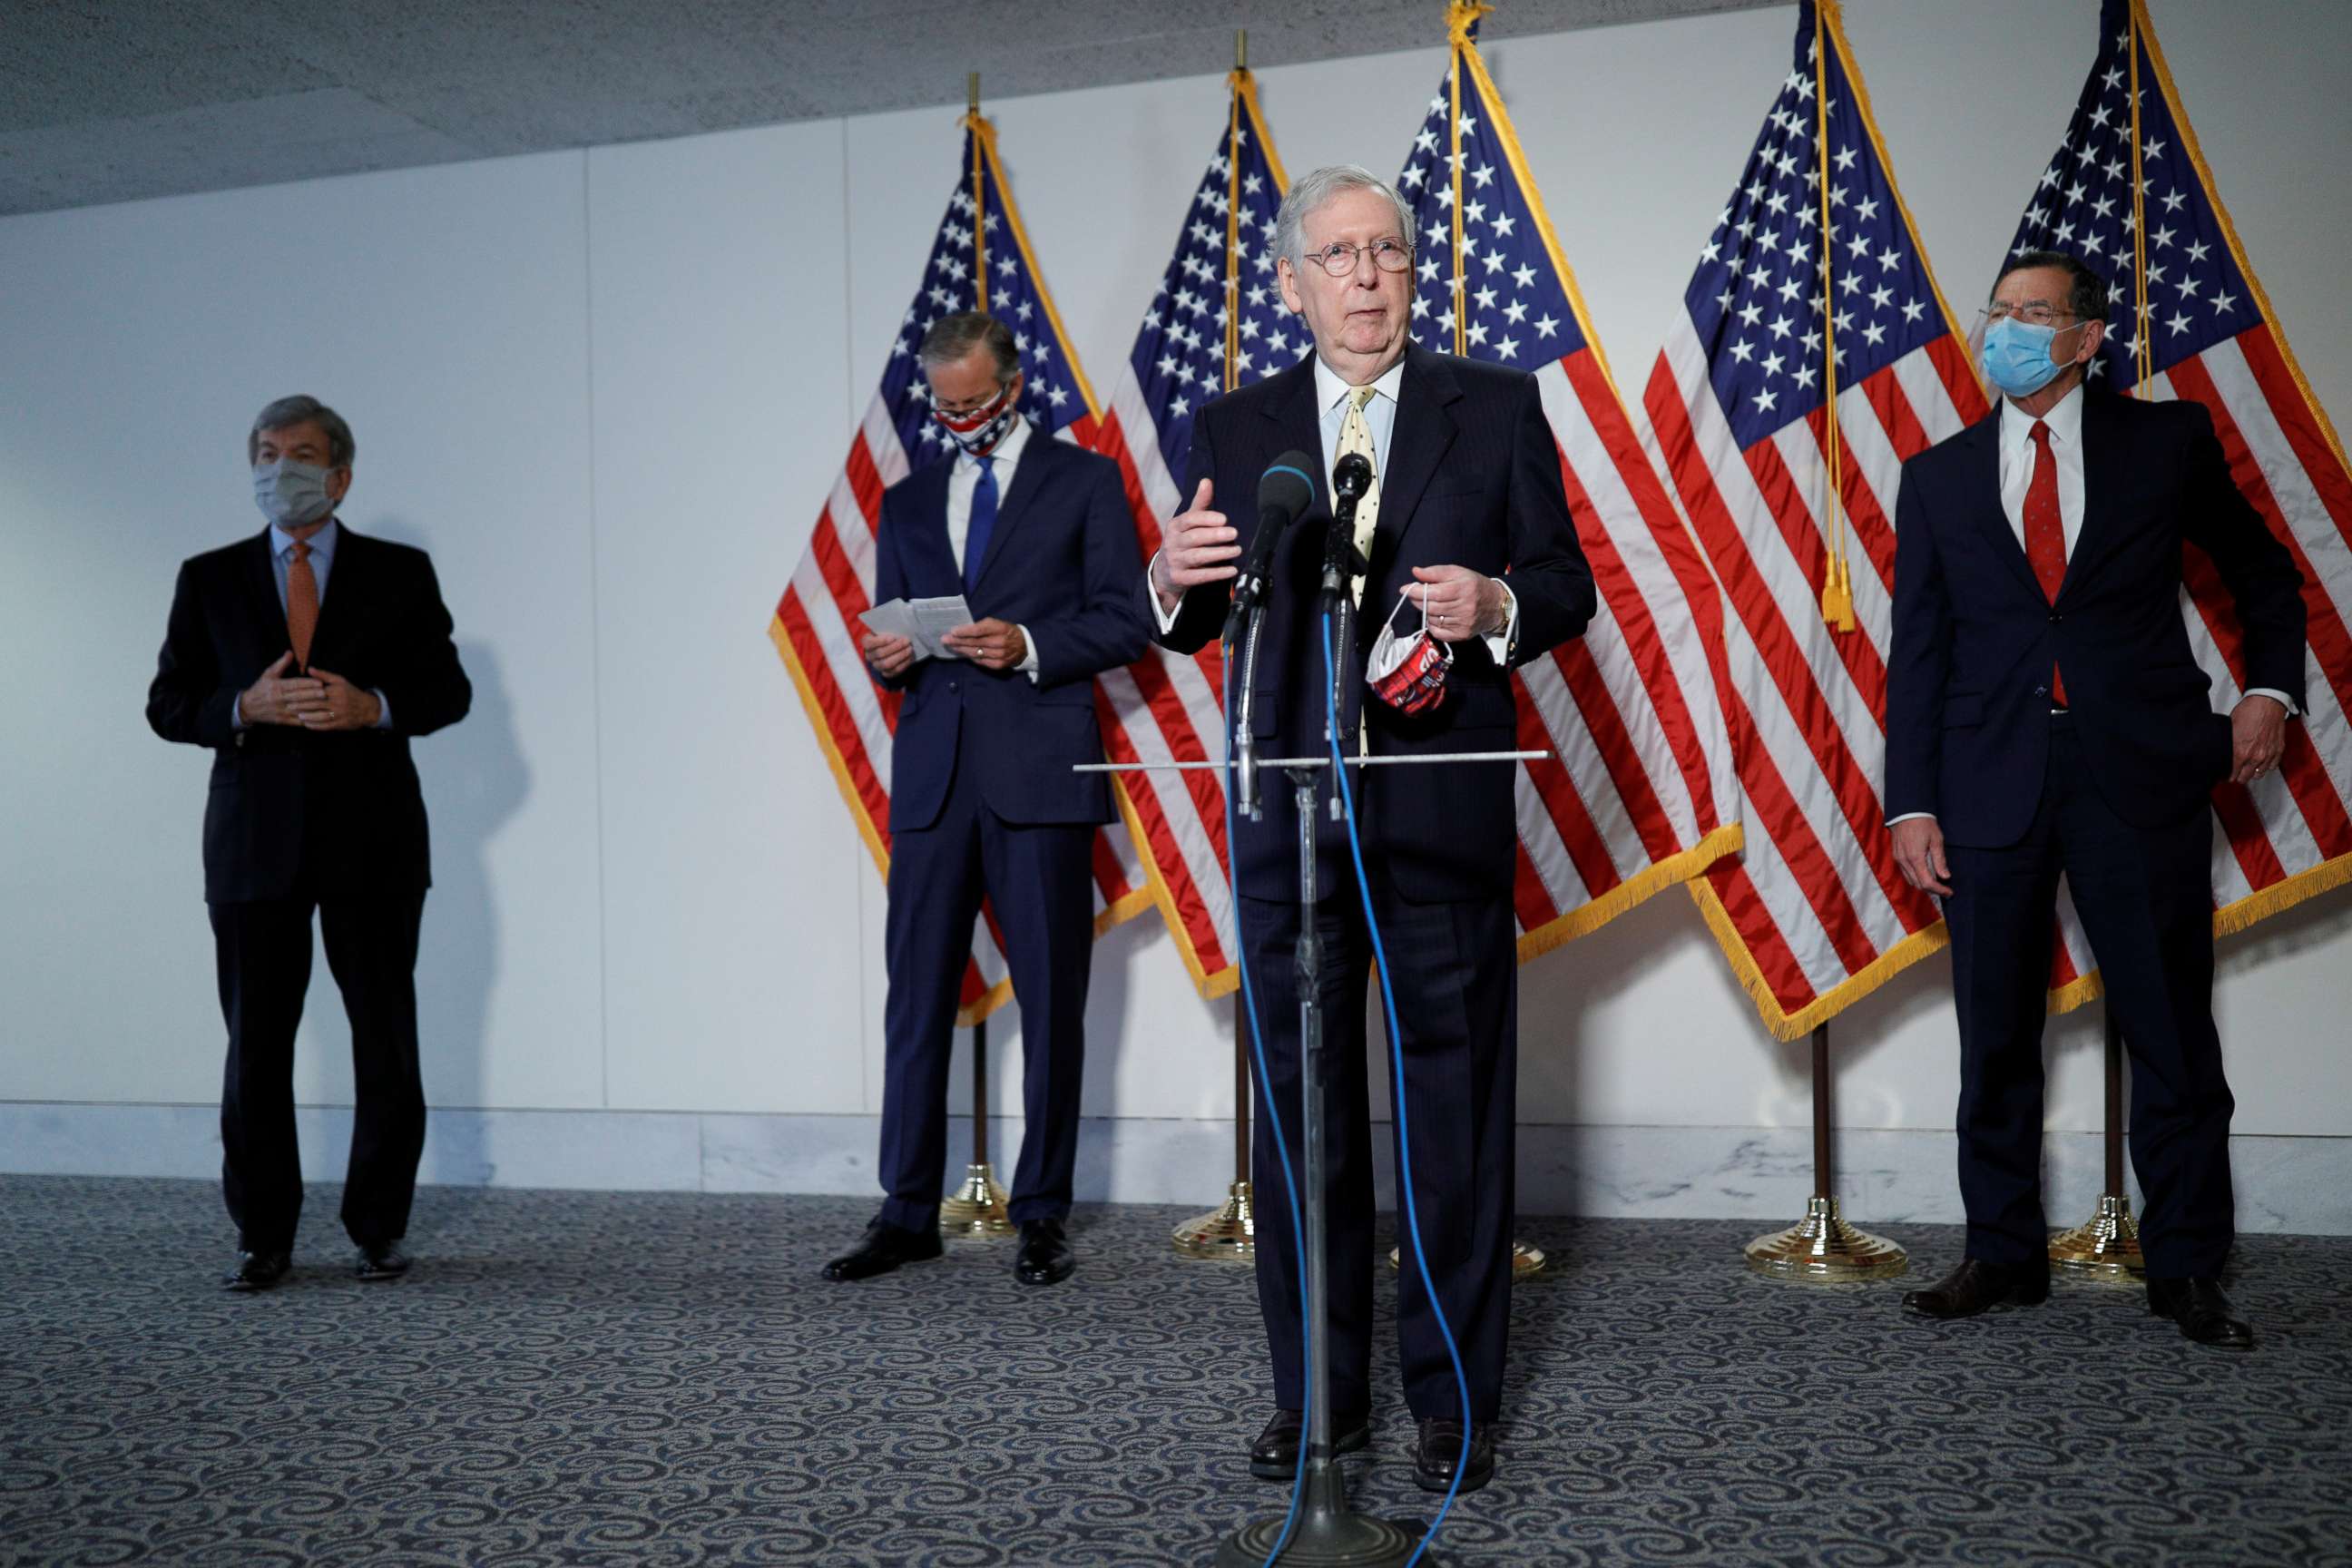 PHOTO: Senators Roy Blunt, John Thune and John Barrasso look on as Senate Majority Leader Mitch McConnell takes questions from news reporters following a closed-door policy luncheon with fellow Republicans, on Capitol Hill in Washington, July 21, 2020.